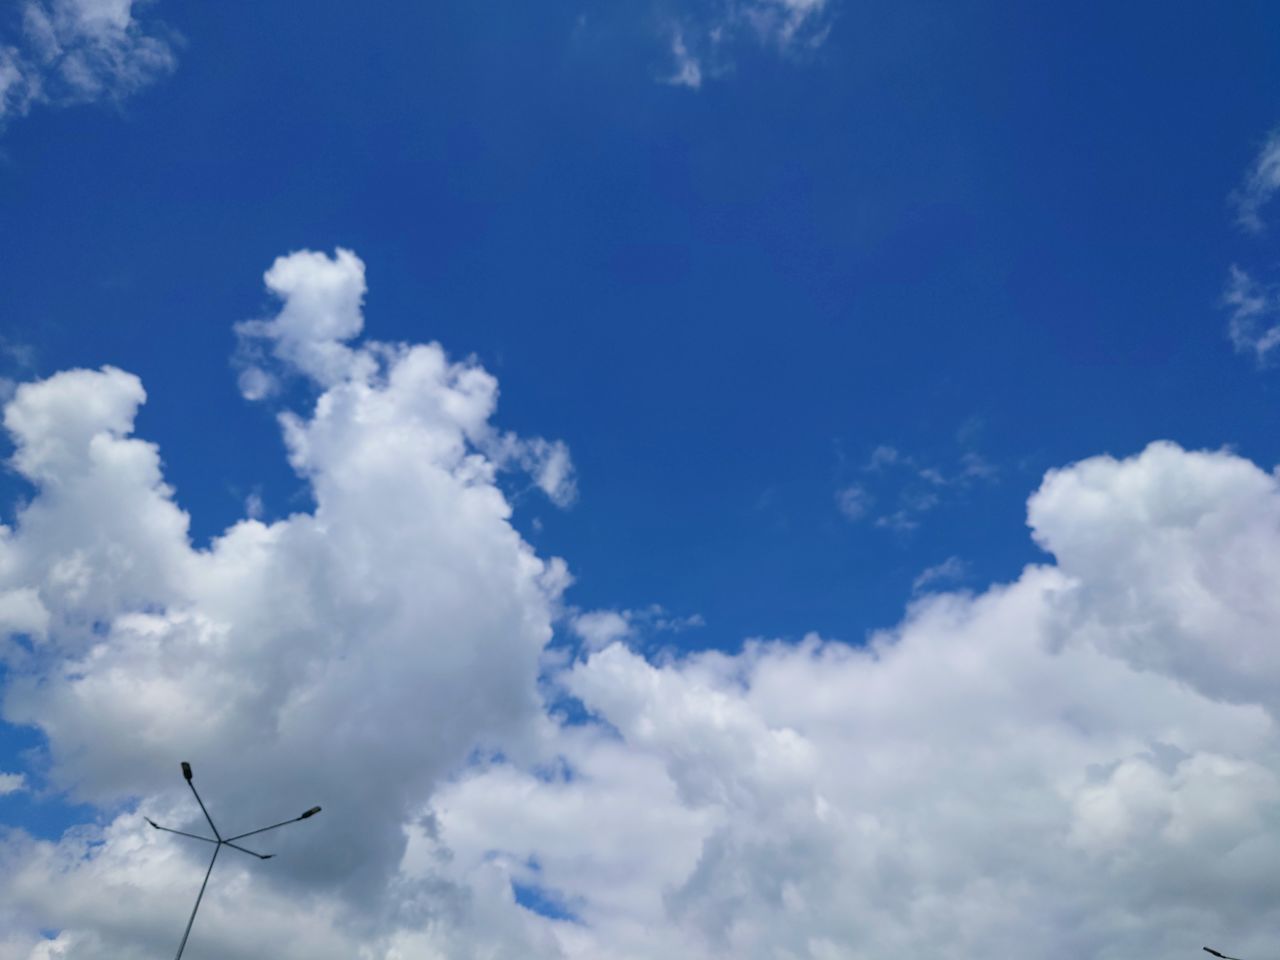 sky, cloud, blue, daytime, nature, flying, environment, airplane, cloudscape, low angle view, day, no people, beauty in nature, outdoors, wind, air vehicle, overcast, white, mid-air, scenics - nature, fluffy, tranquility, atmosphere, idyllic, transportation